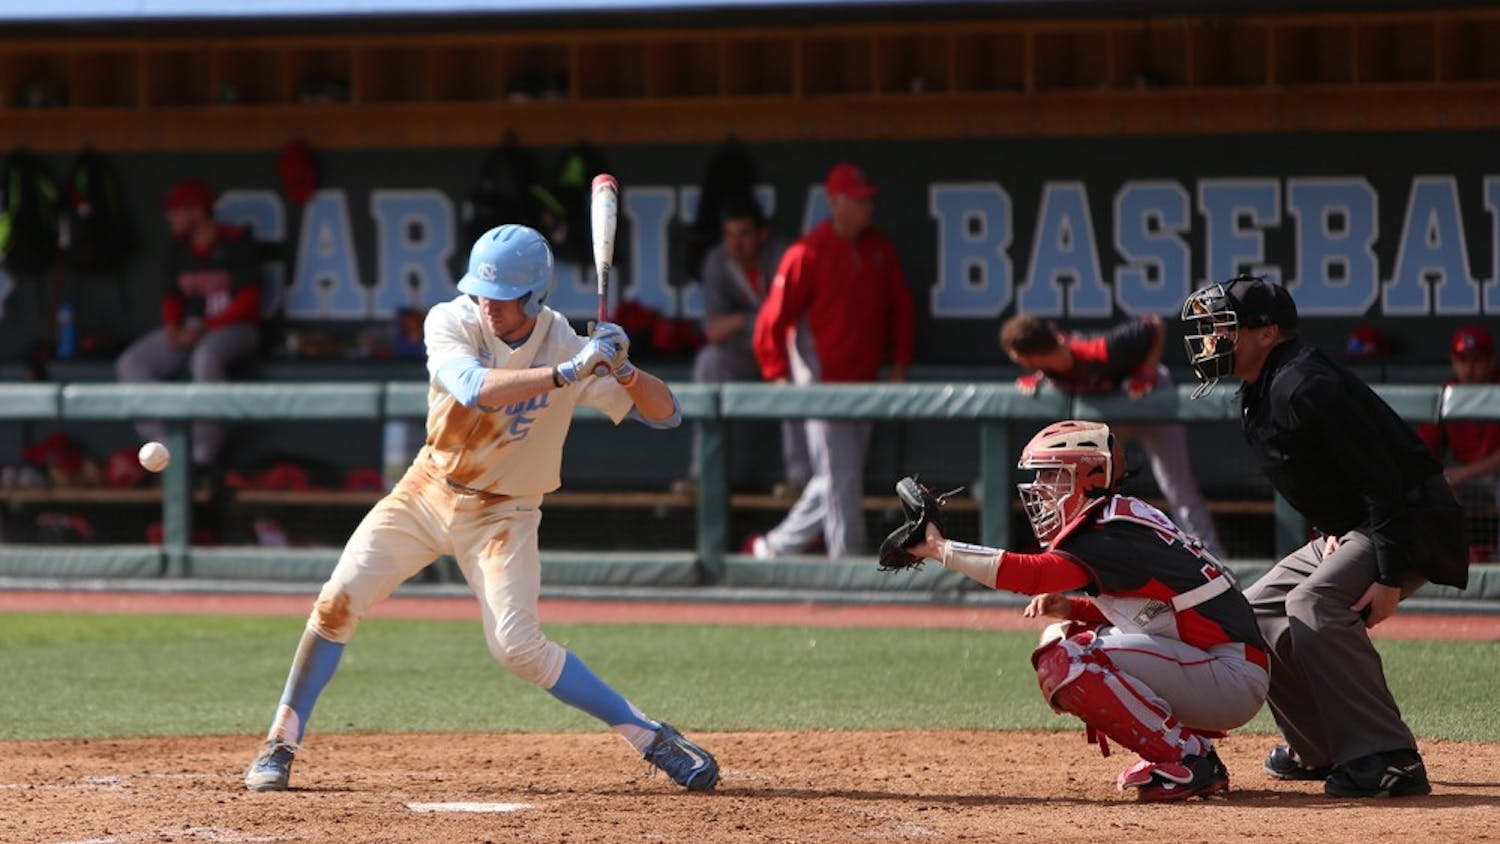 The UNC baseball team took on Fairfield in a three game series throughout the weekend. 